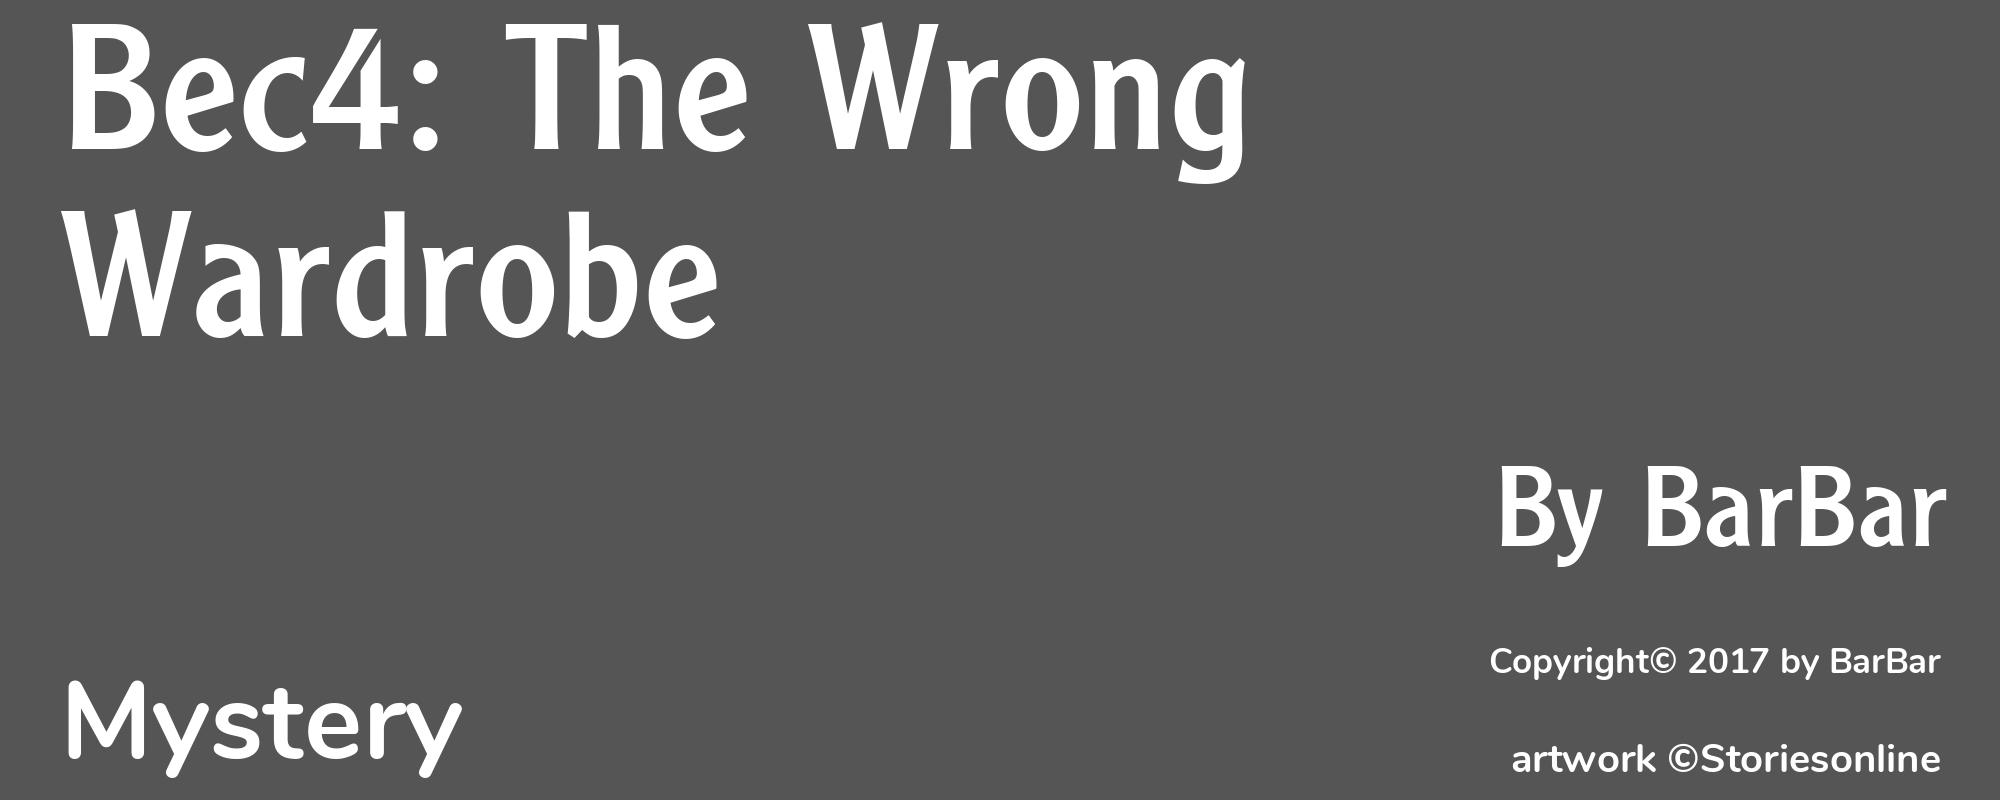 Bec4: The Wrong Wardrobe - Cover